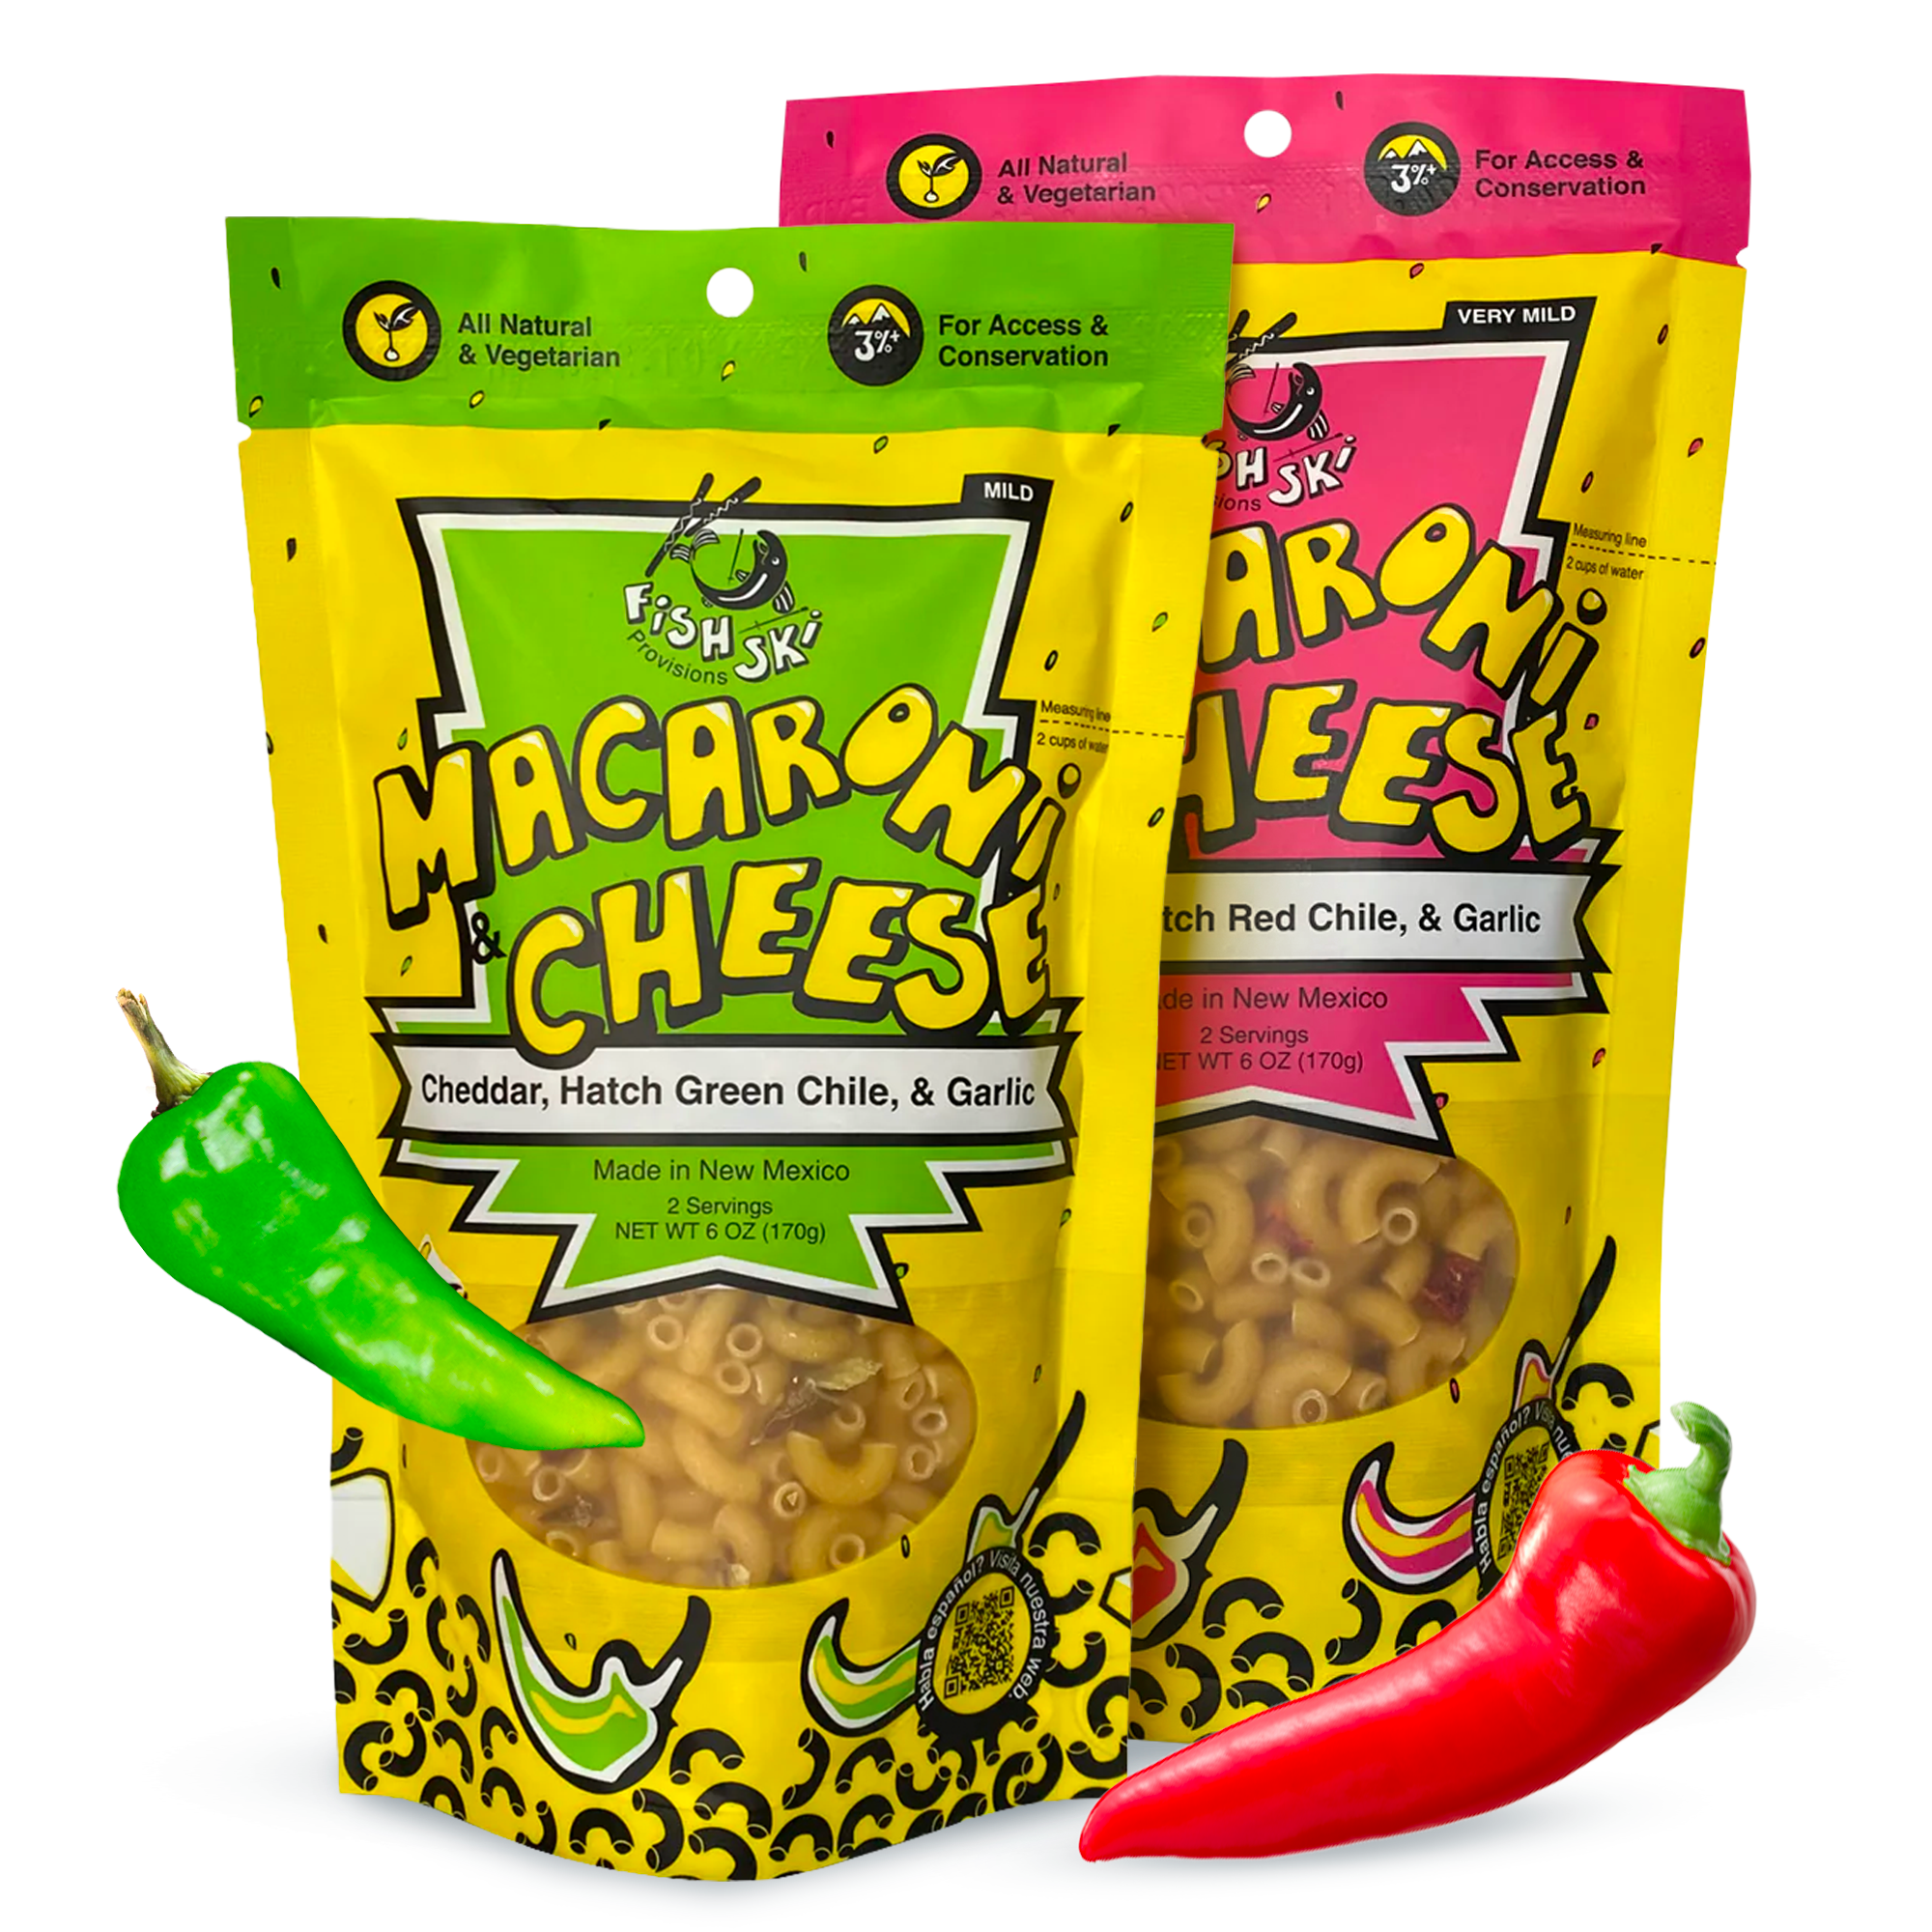 Macaroni and Cheese with Hatch Green and Red Chile + Cheddar Cheese + Garlic, Variety Pack, by FishSki Provisions, 6 oz bags, 2 pack - image 1 of 5